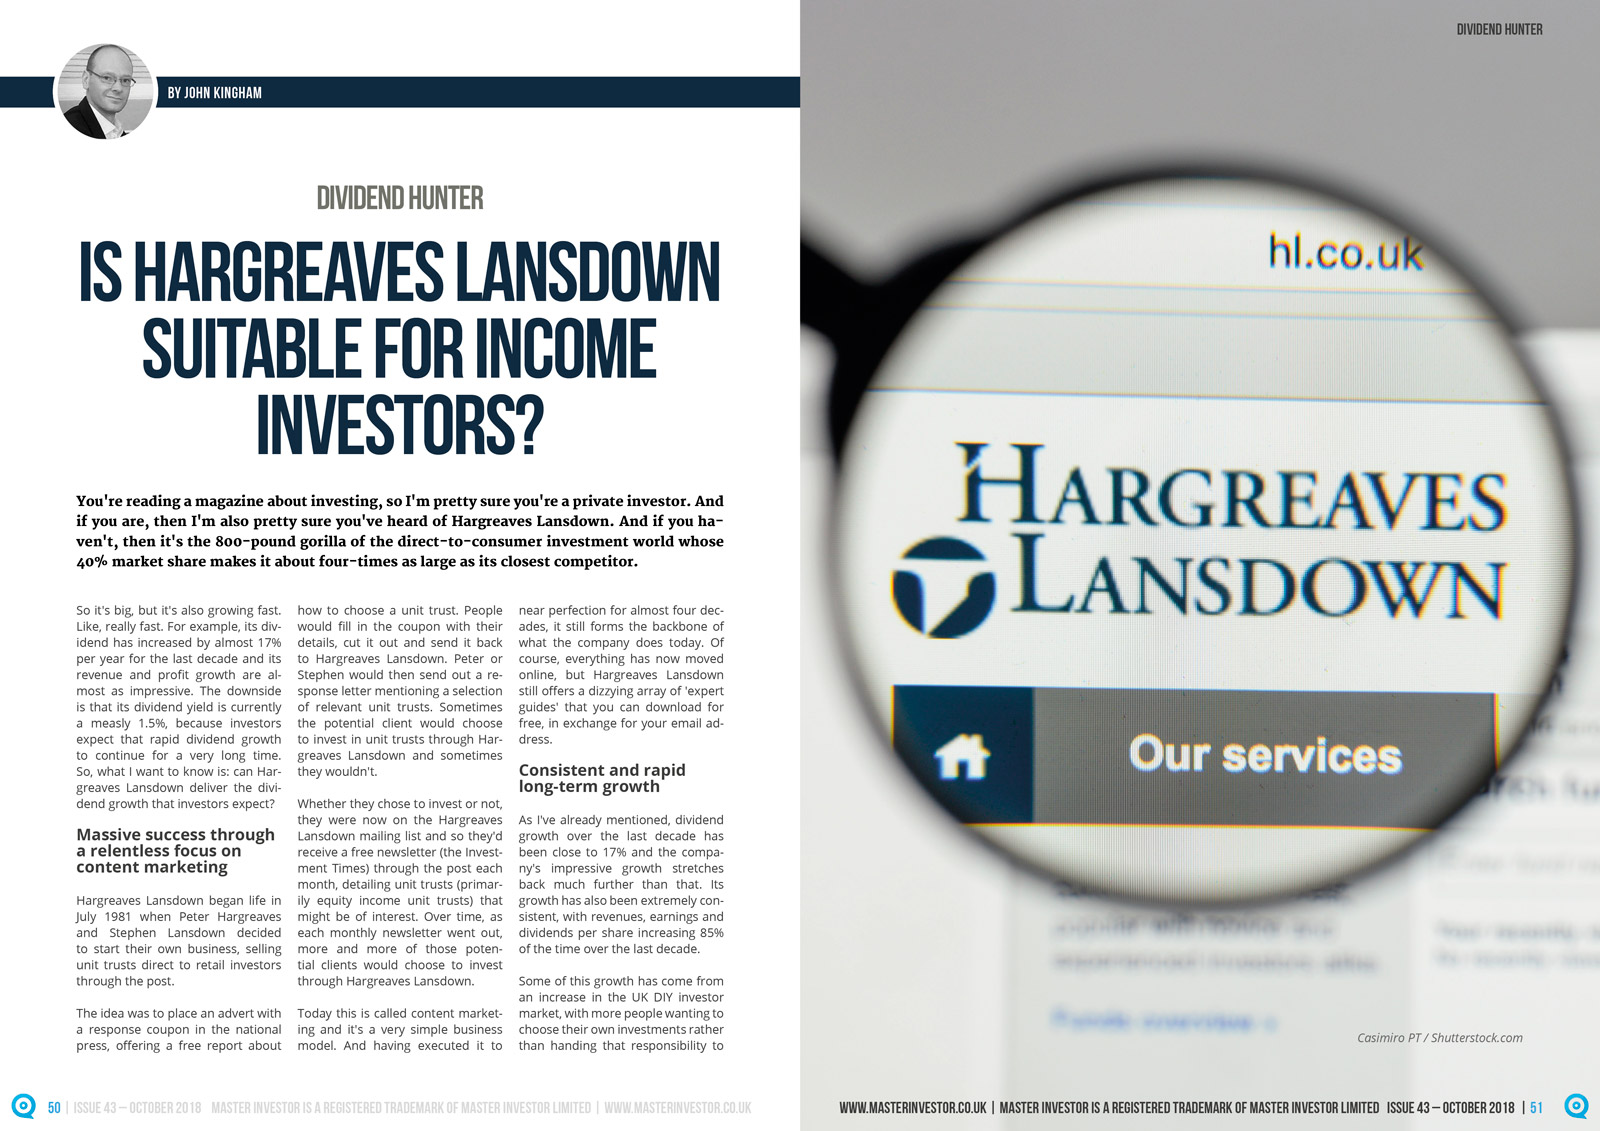 Is Hargreaves Lansdown suitable for income investors?